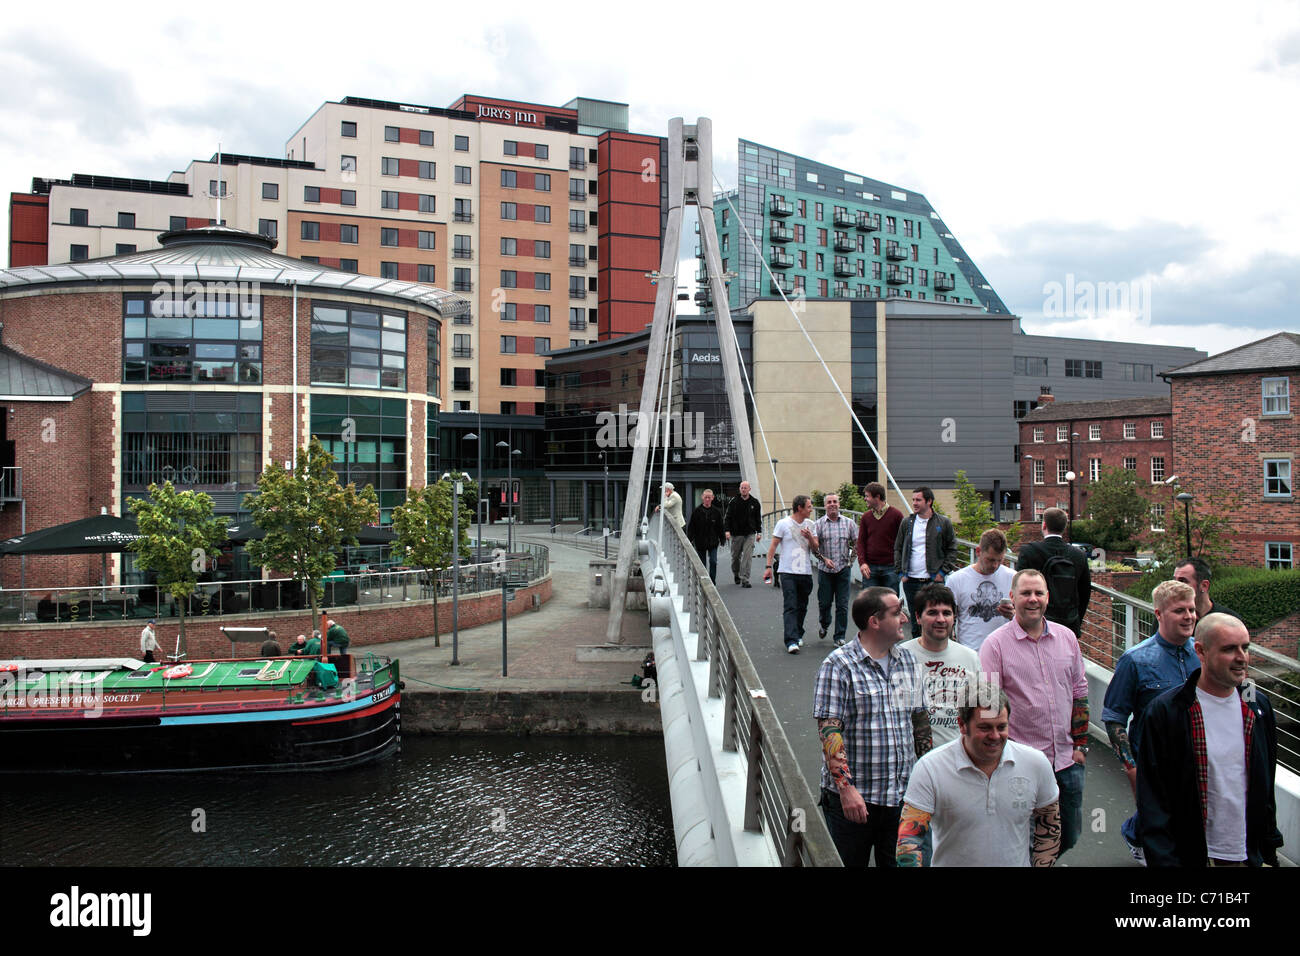 View across Centenary Bridge, a footpath link over the River Aire, Leeds, opened in 1992. Looking towards Brewery Wharf. Stock Photo